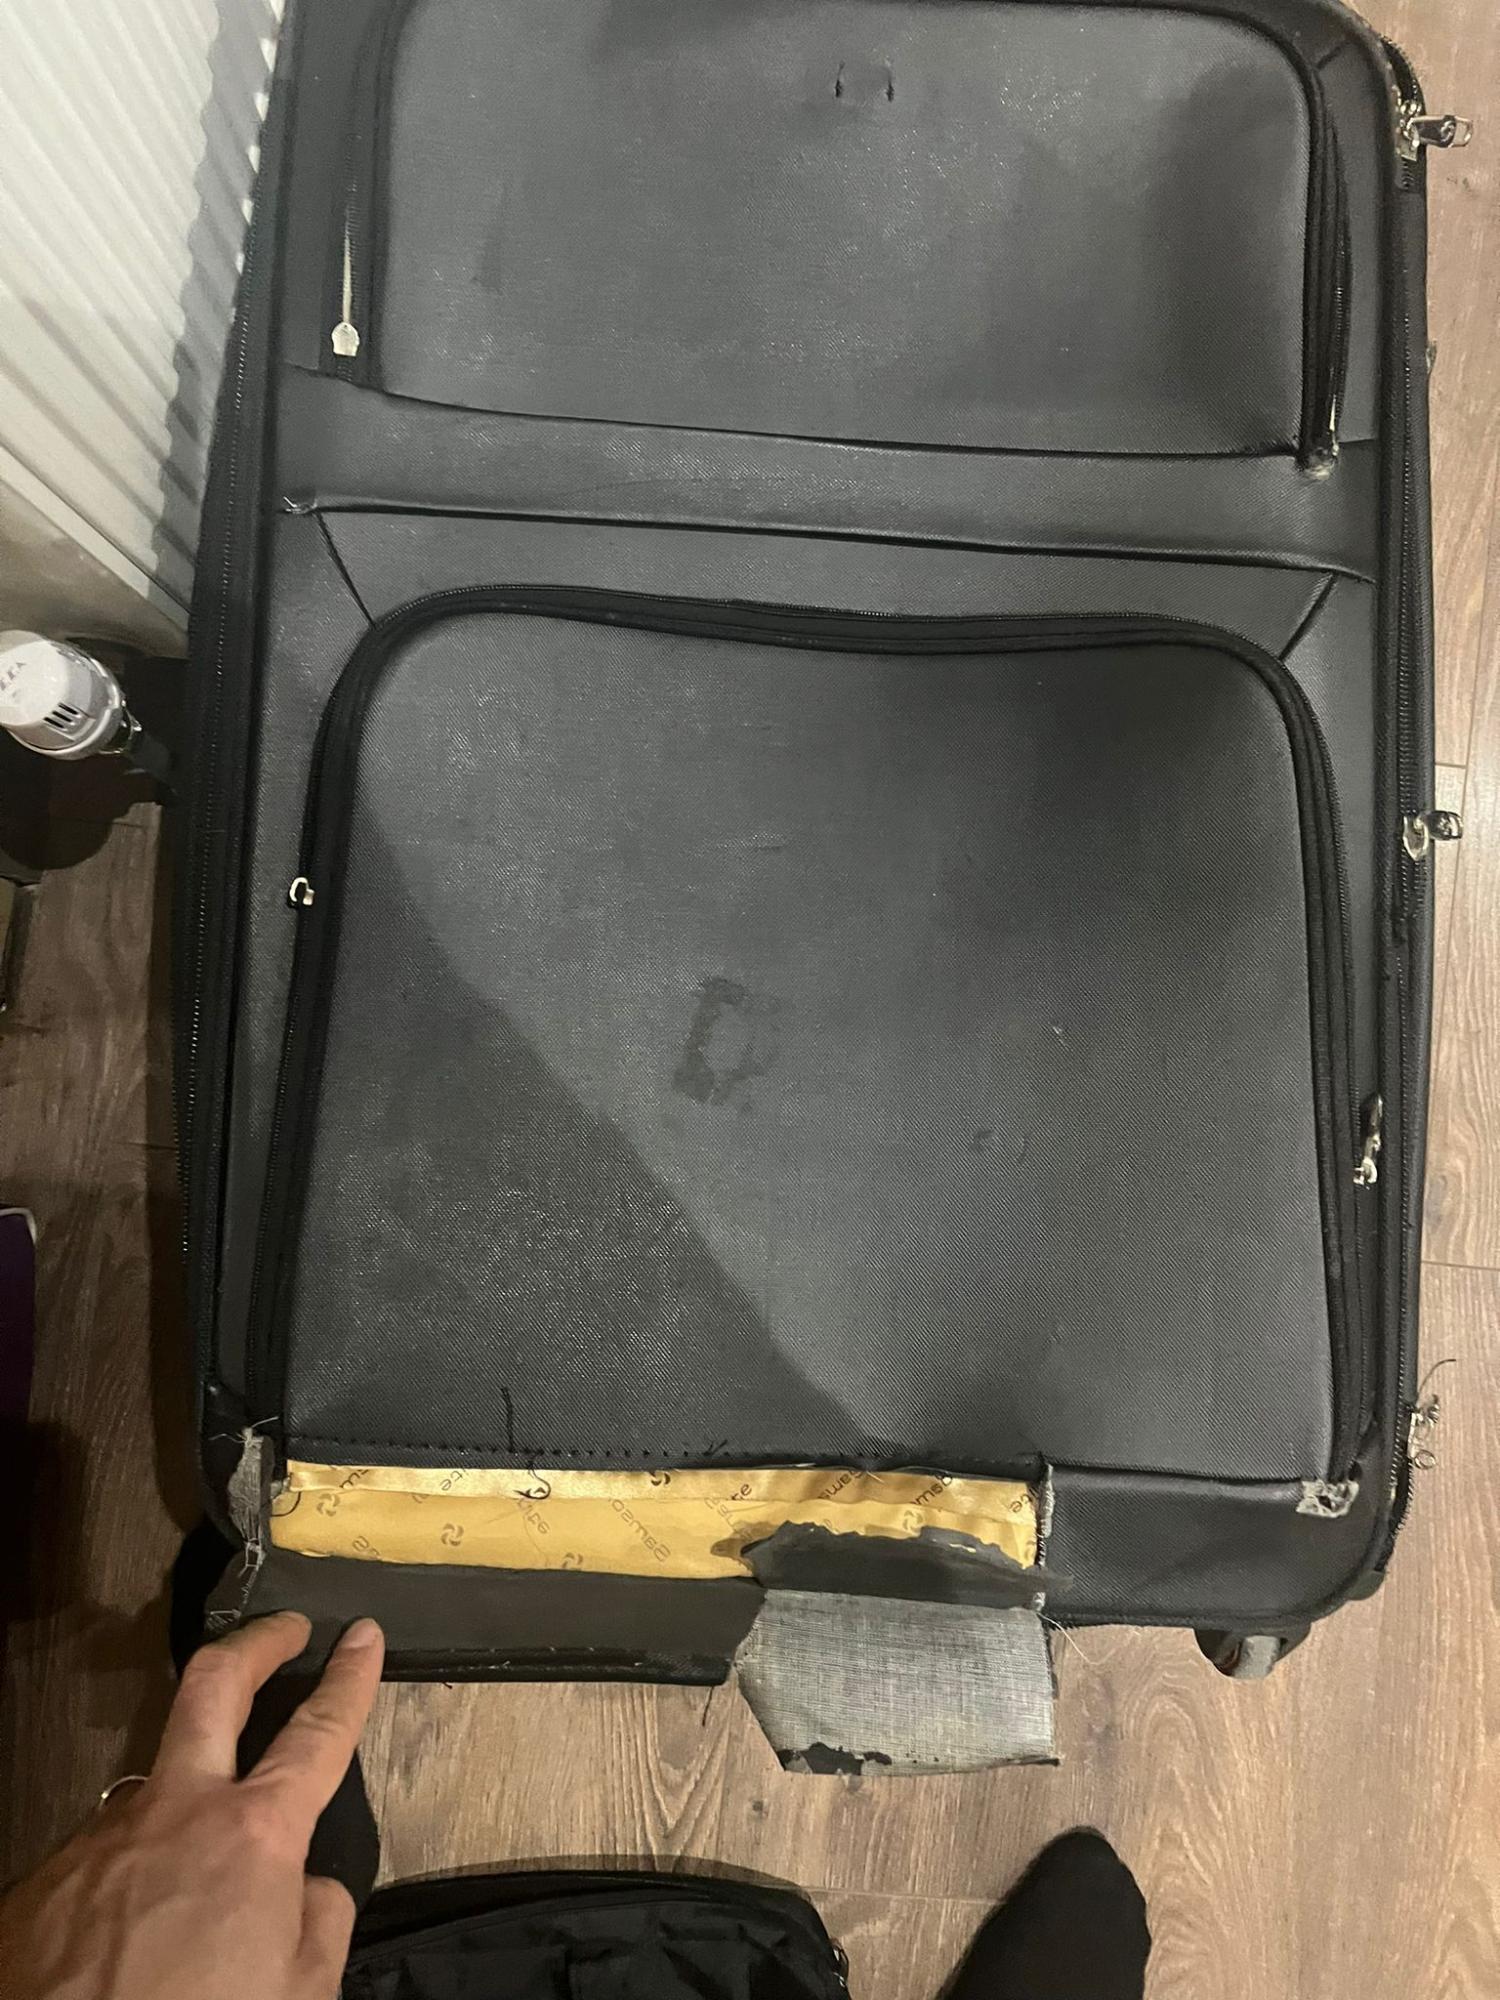 How to get airline compensation for lost or damaged baggage - Quora